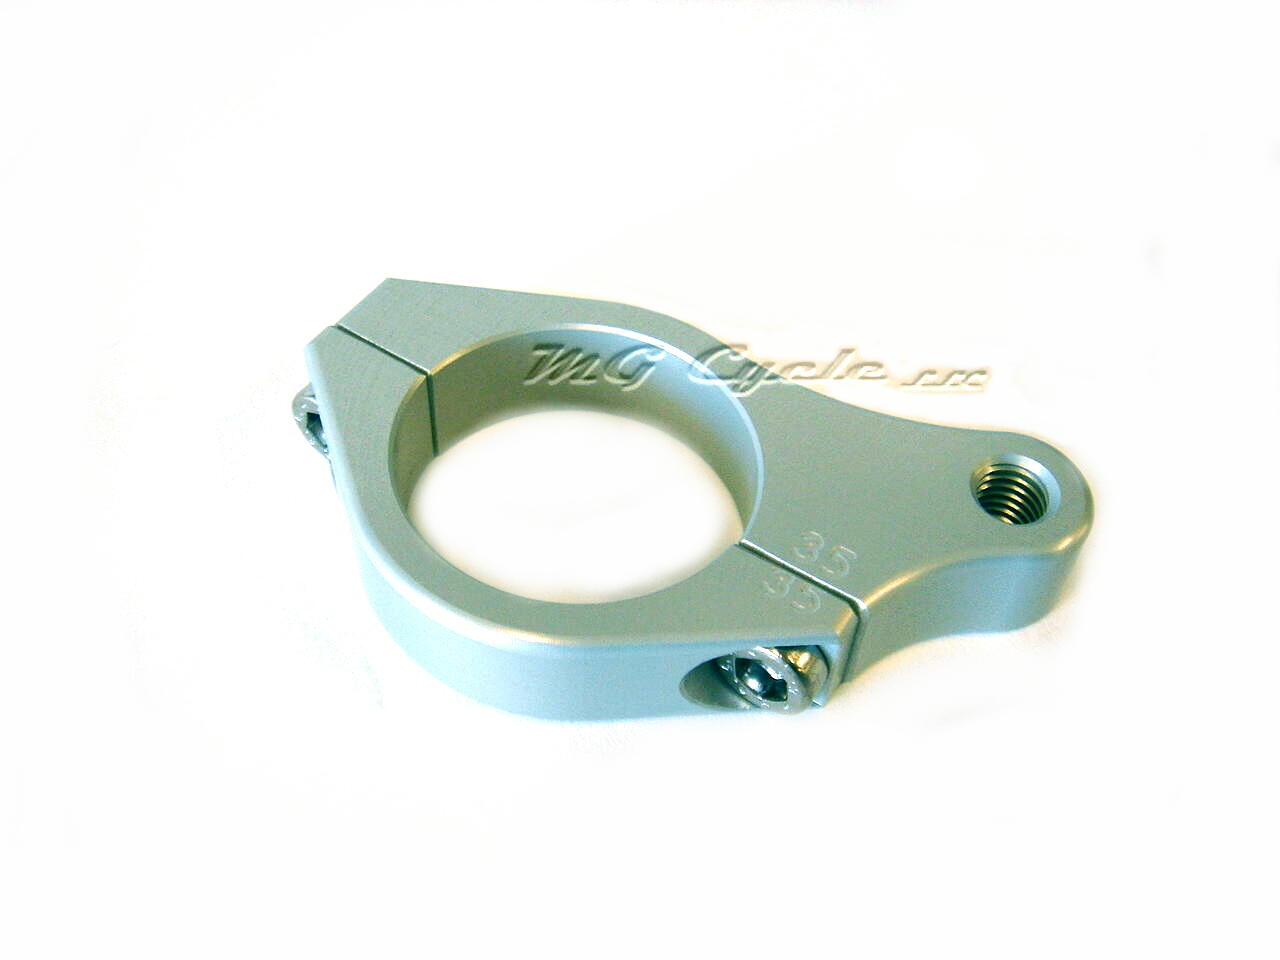 Steering damper attachment clamp for 35mm fork